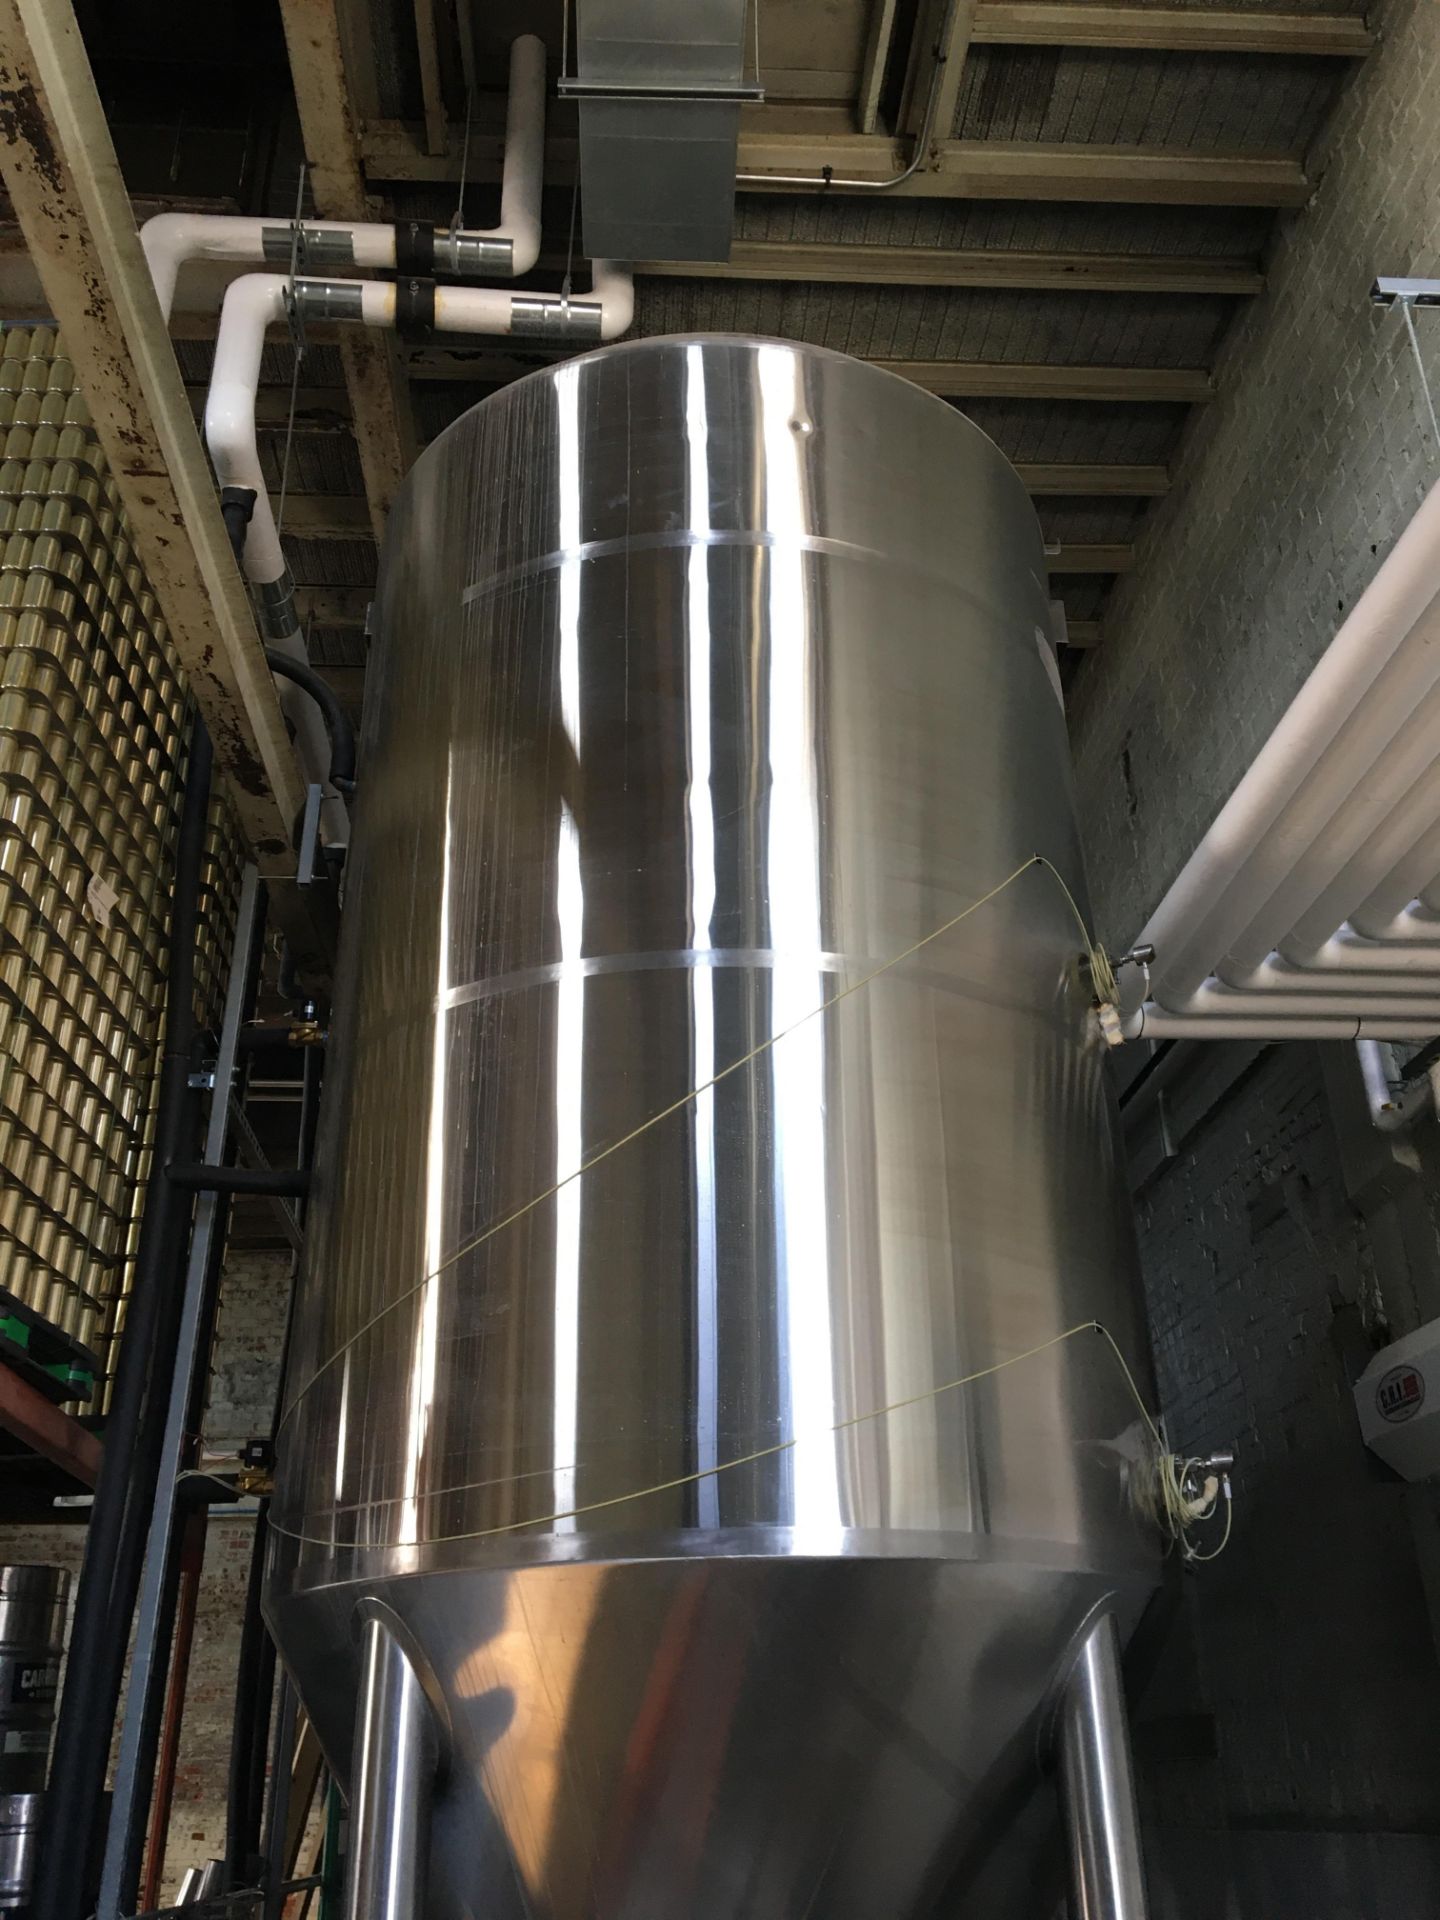 80-BBL Minnetonka Fermentation Tank, Model 80-BBL, Year 2017, Stainless Steel; Vessel store wort and - Image 3 of 9